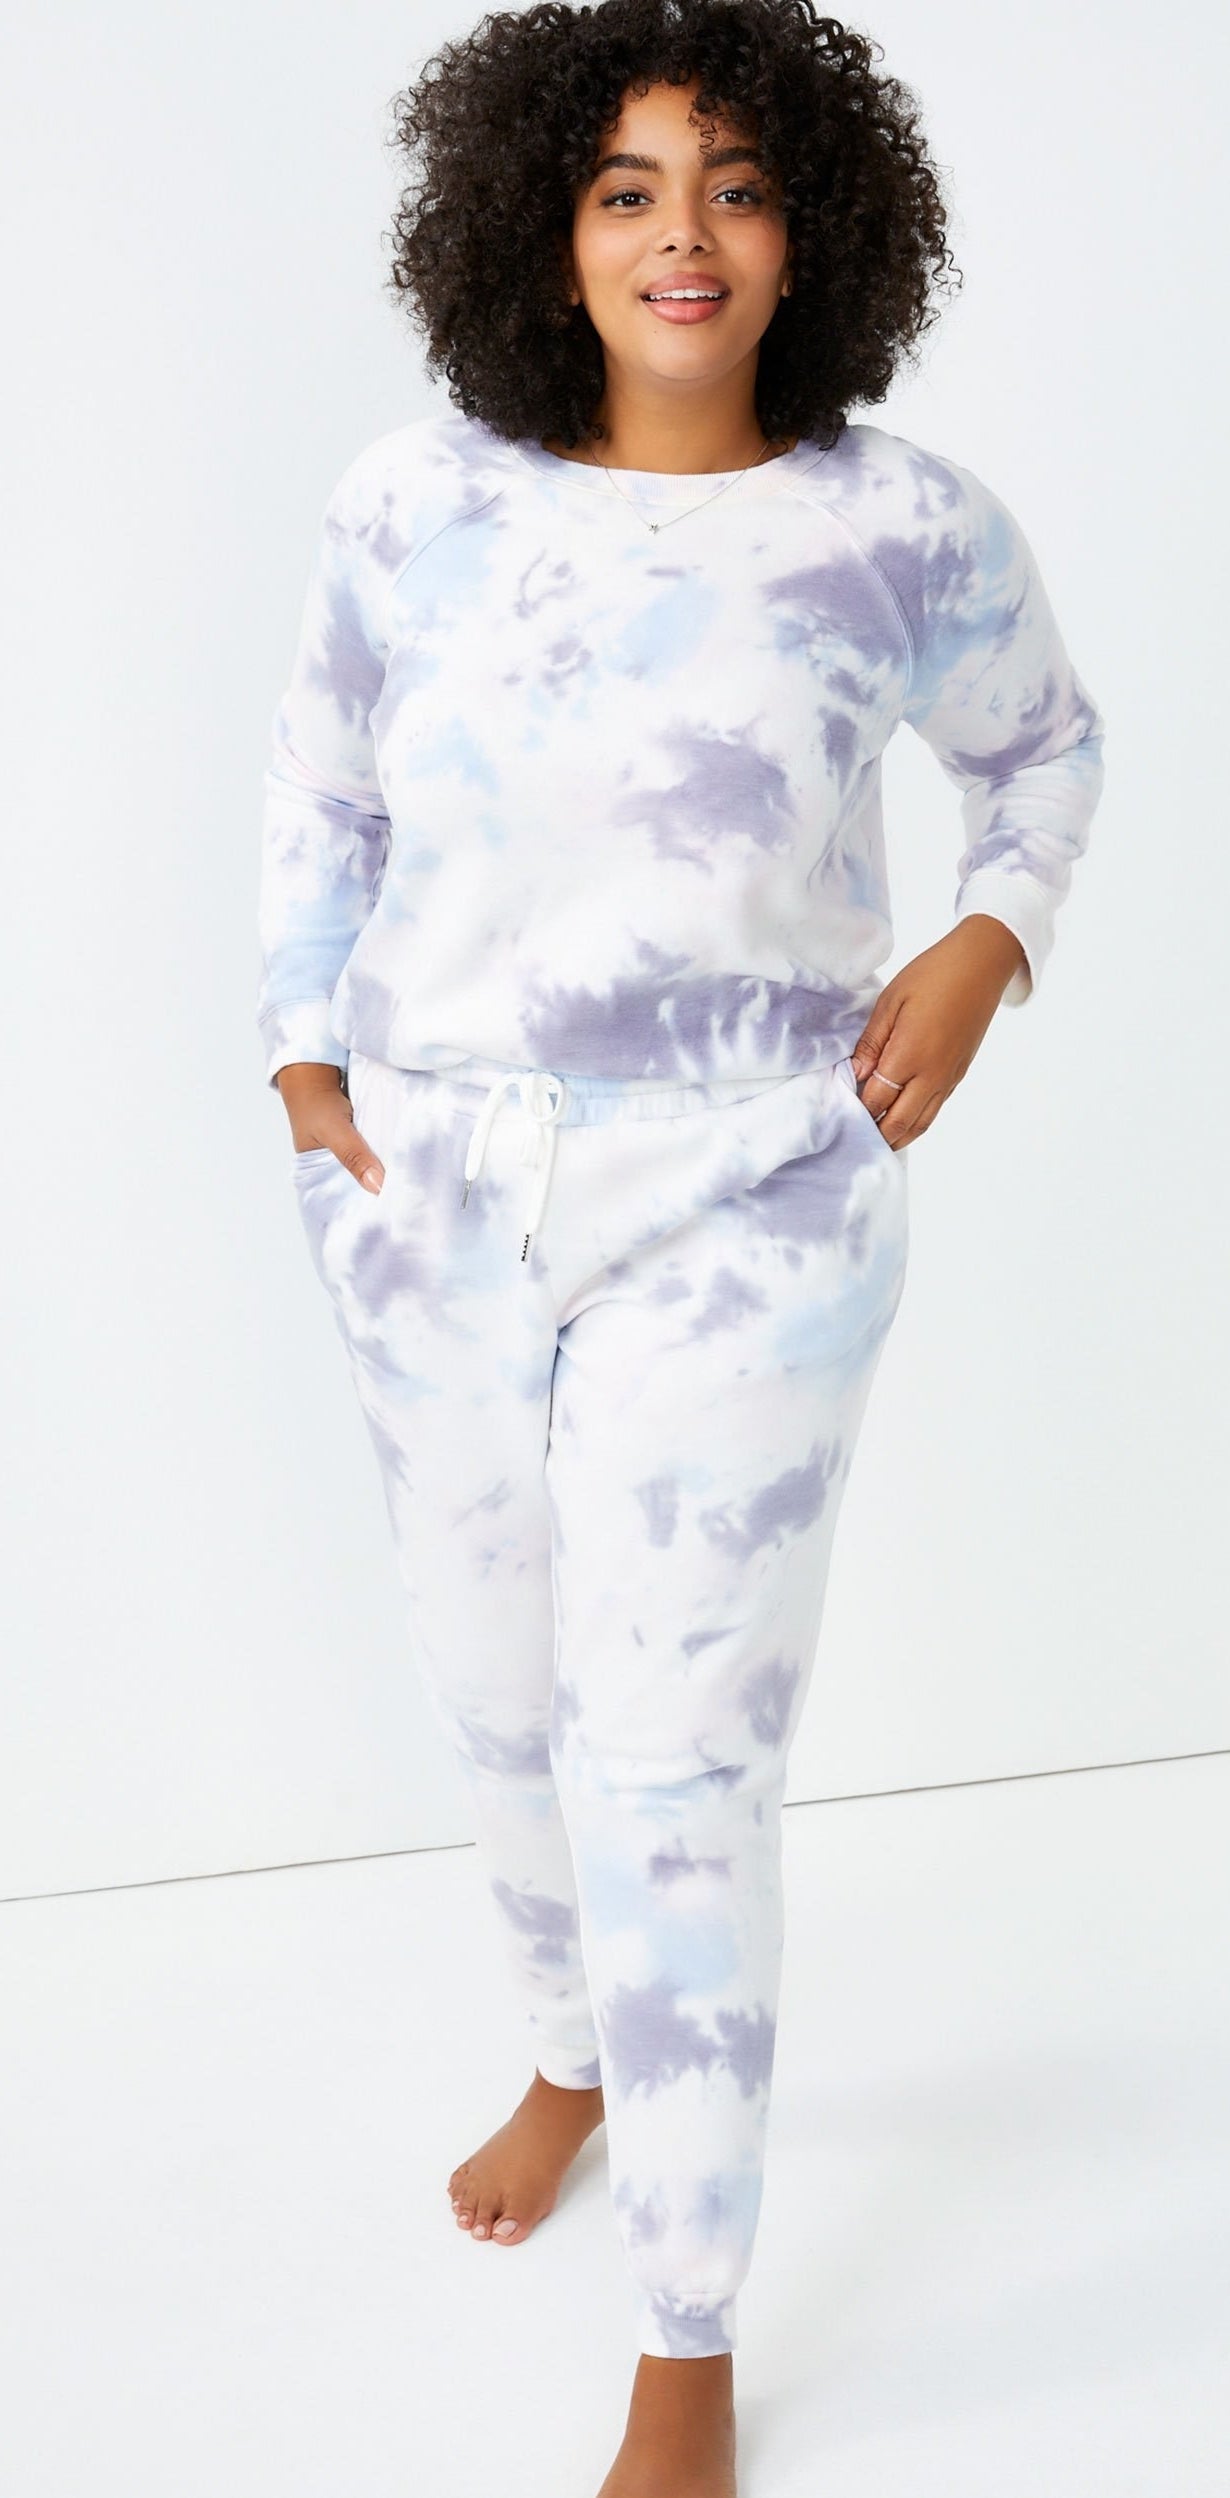 Model wears white, purple, and blue tie-dye joggers with matching sweatshirt